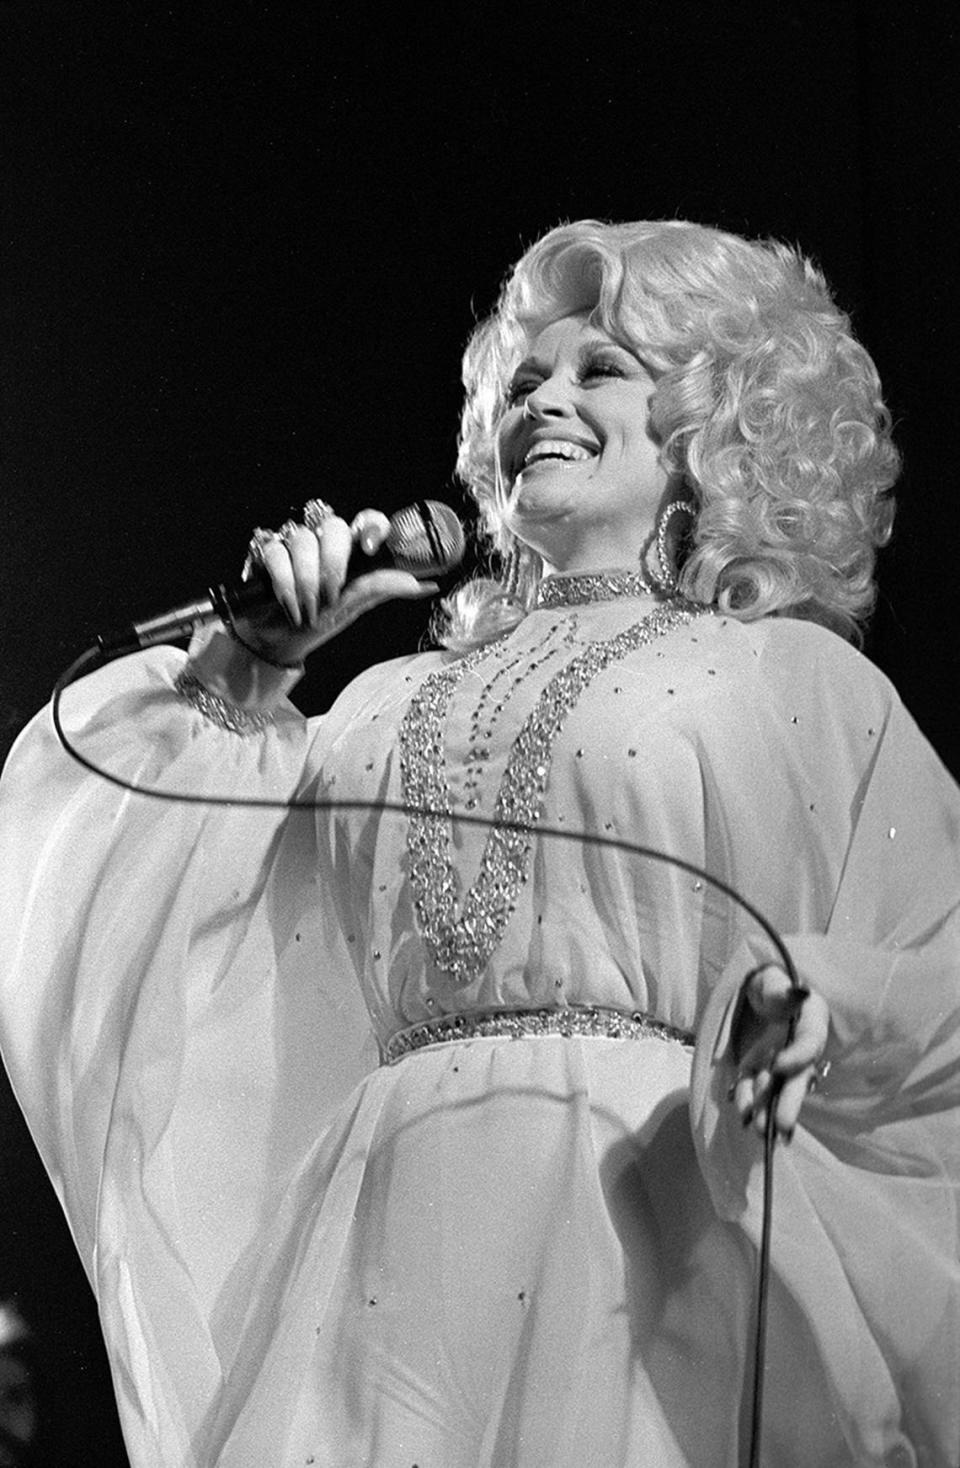 Dec. 2, 1977: Dolly Parton performing in concert at Panther Hall in Fort Worth, Texas, to a crowd of 1,250 people in the venue’s country music ballroom.